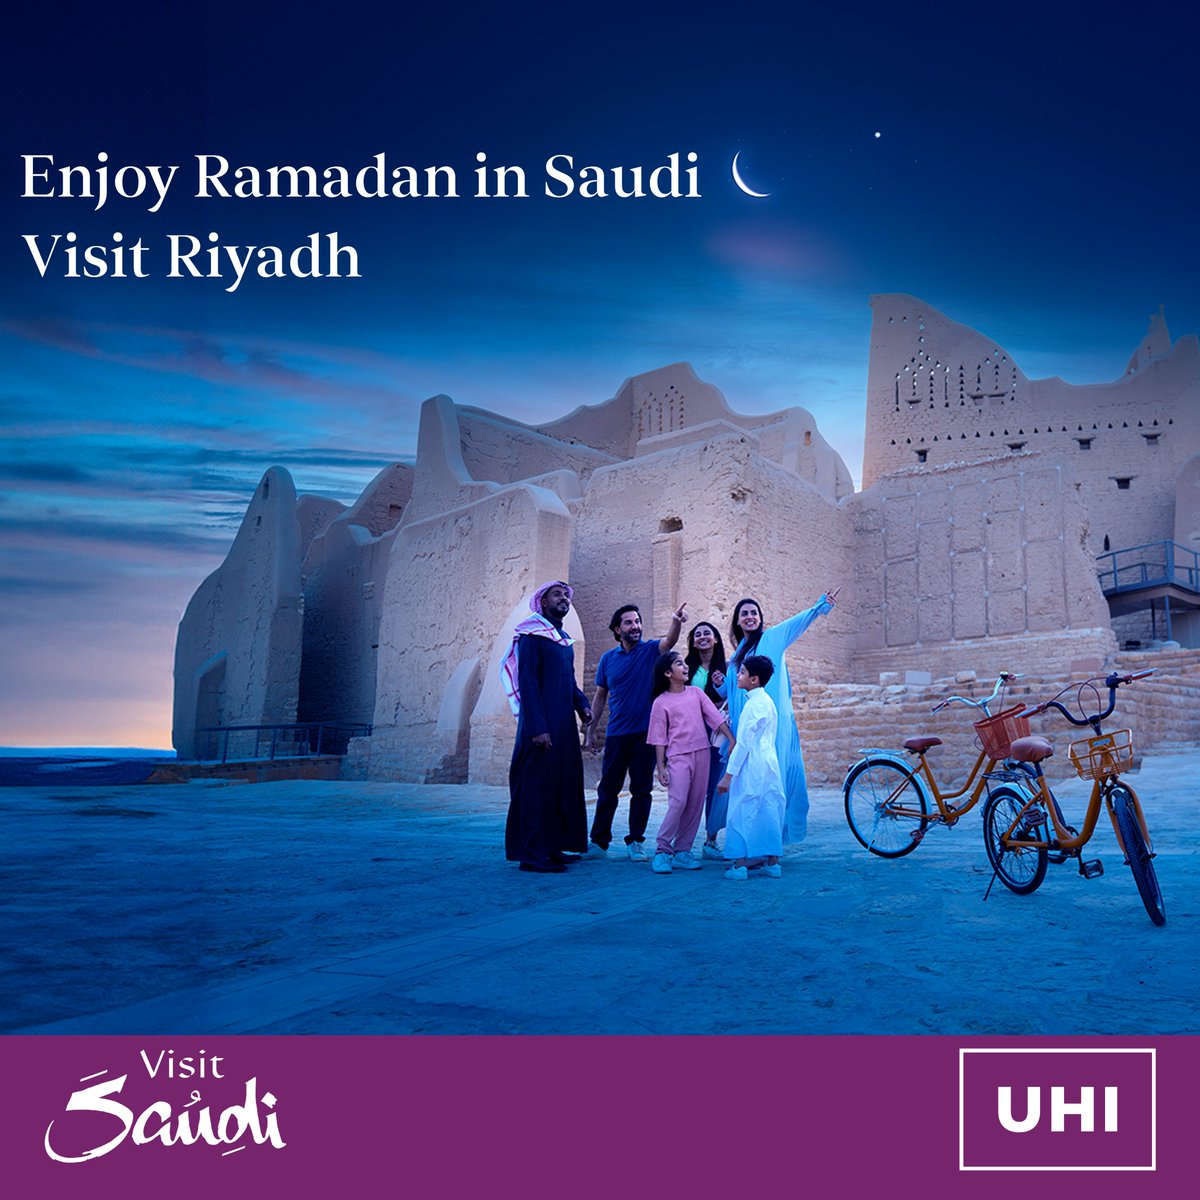 Ready for a whole new world this Ramadan in Saudi!🌙
New locations, events, and activities for everyone to enjoy! ✨

Visit Riyadh in Ramadan and don't miss all the fun.

Read more: tinyurl.com/37vye8bc
Book now: uhitravel.com

#ramadan2024 #ramadanmubarak #UHI